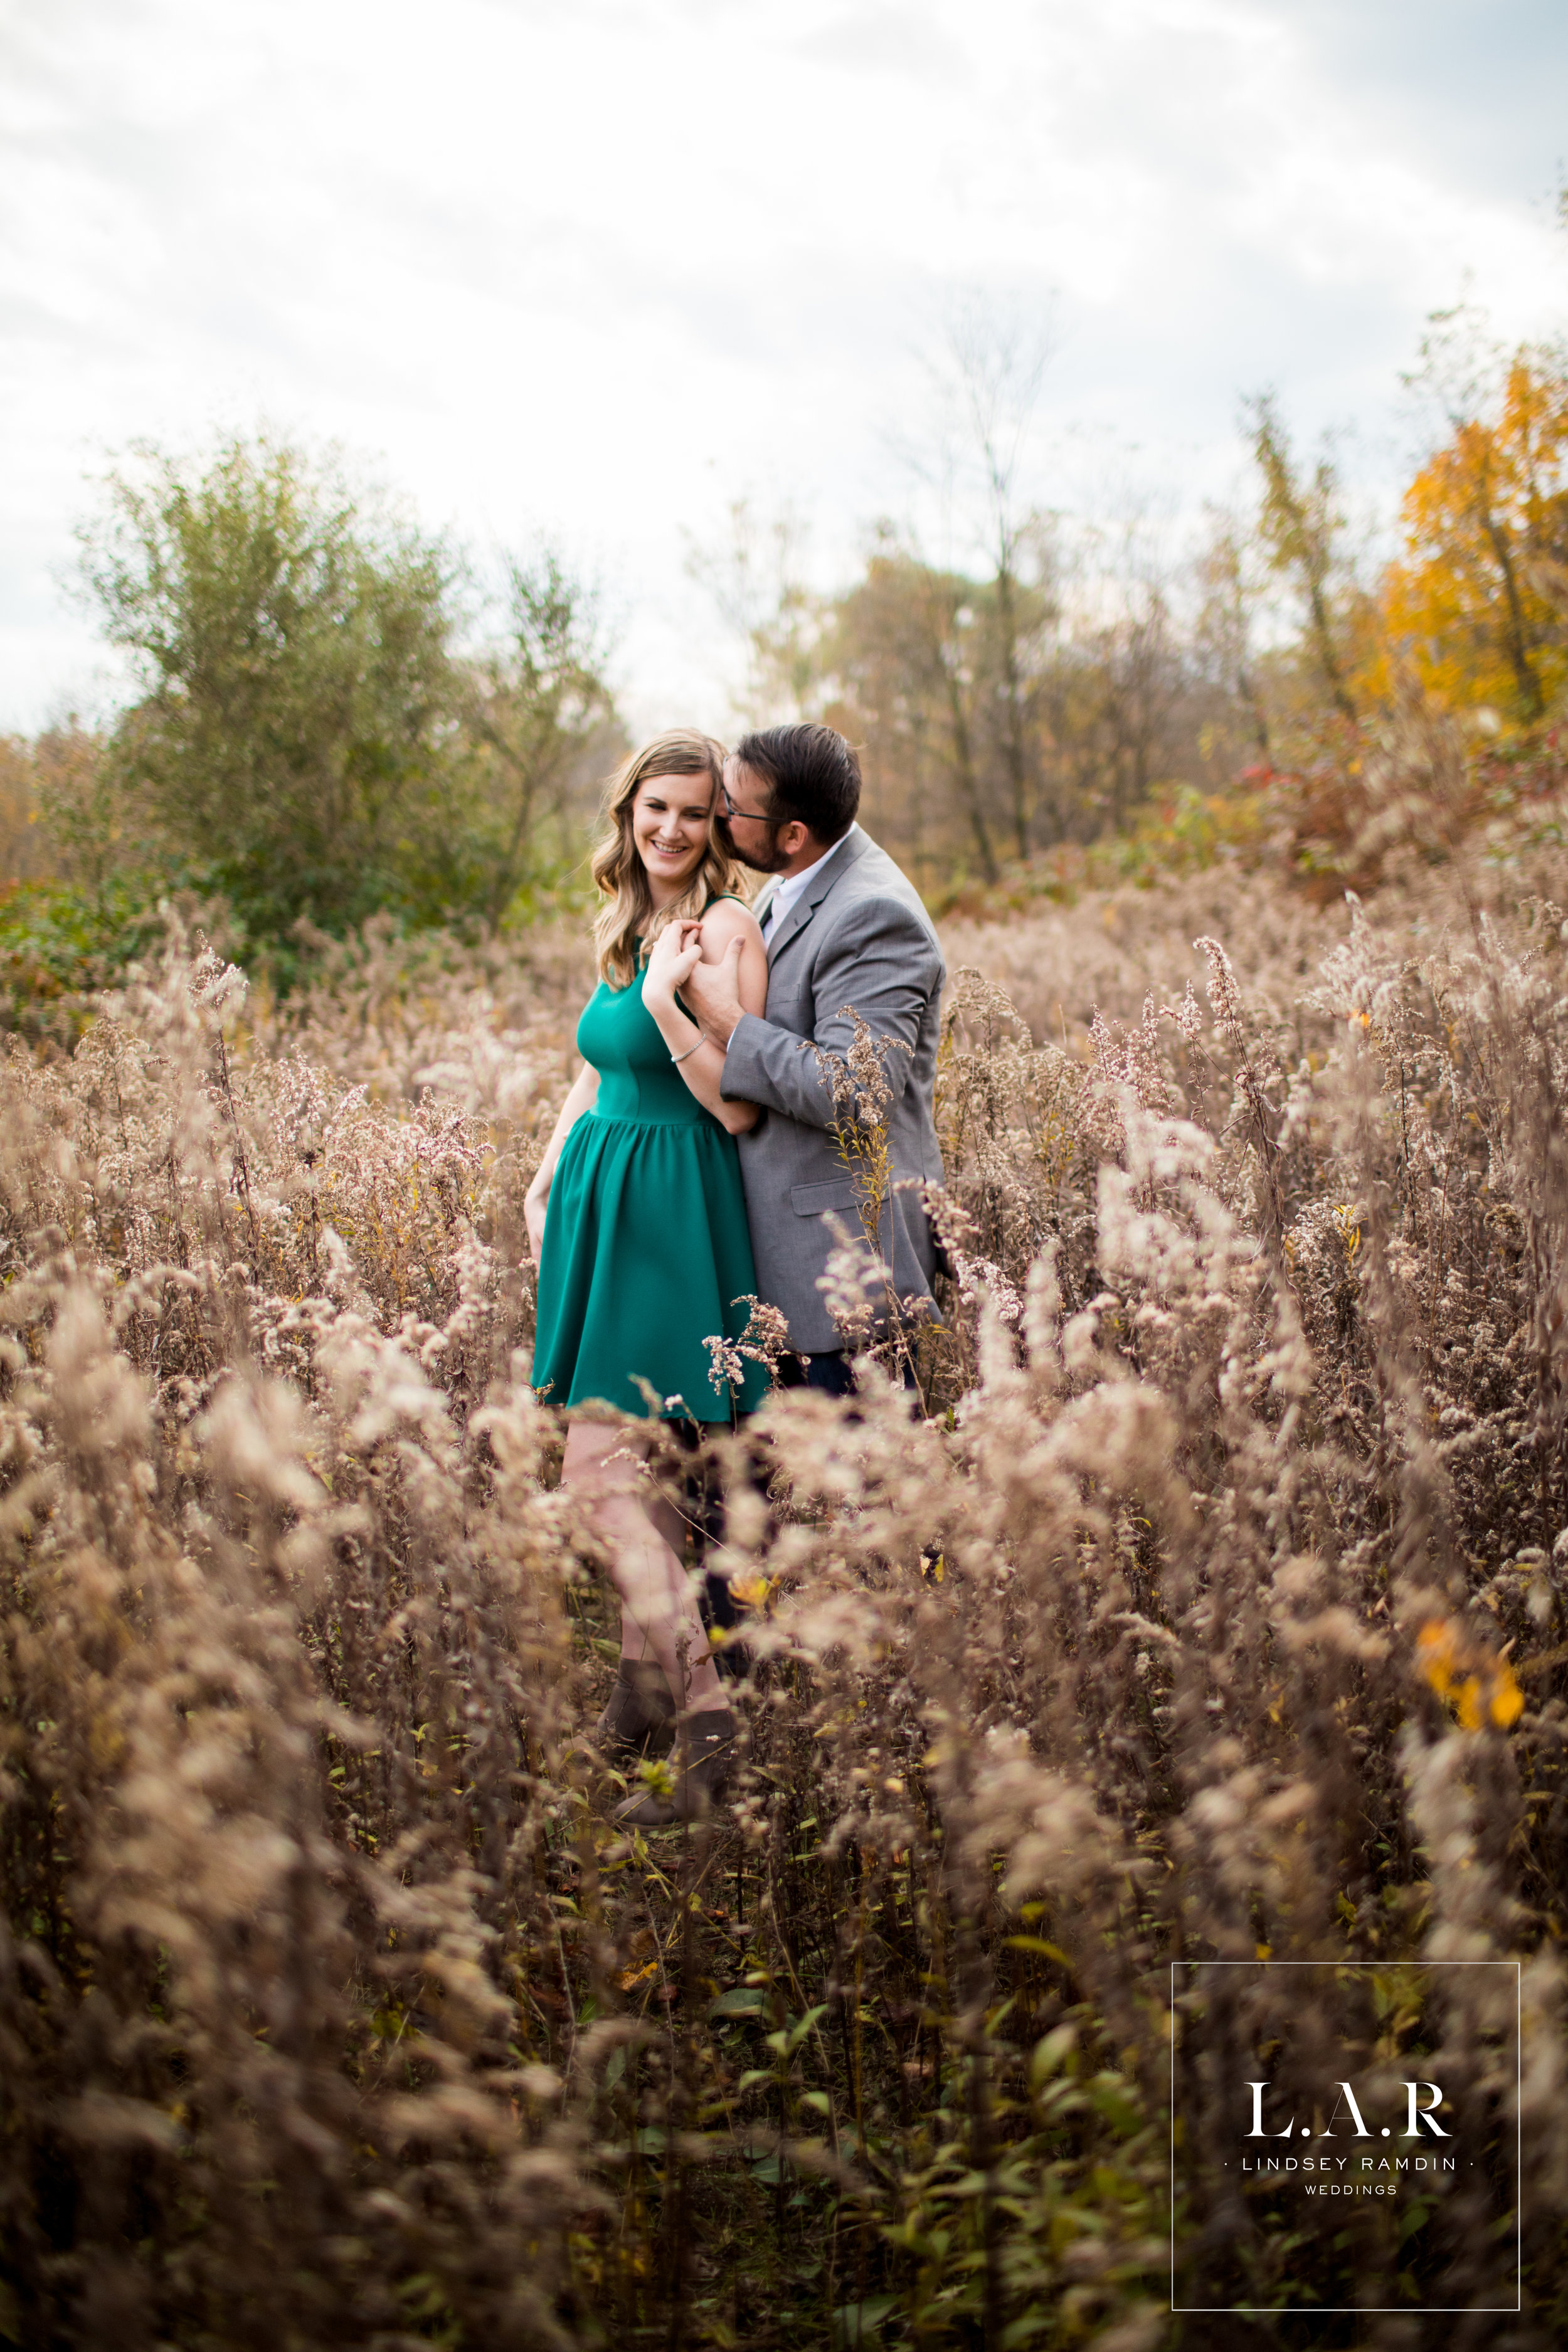 Cuyahoga Valley National Park Engagement Photo | L.A.R Weddings | Lindsey Ramdin